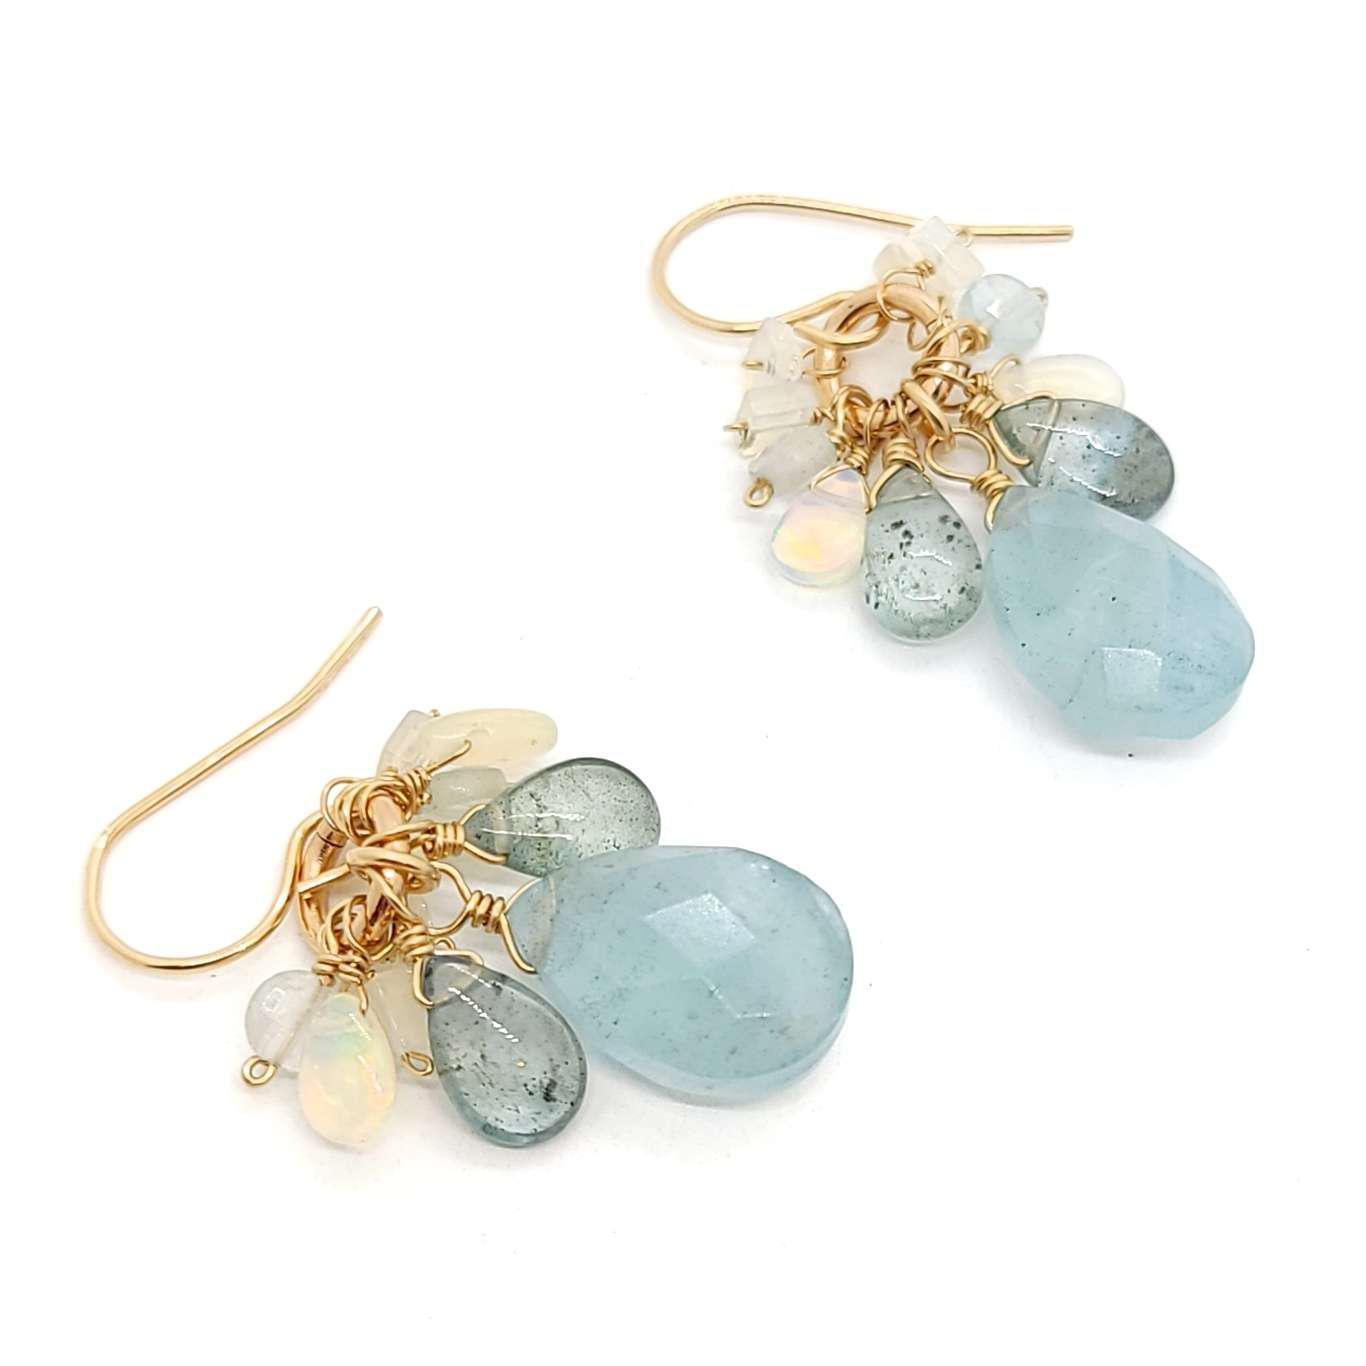 Earrings - Aquamarine and Opal Cluster by Calliope Jewelry